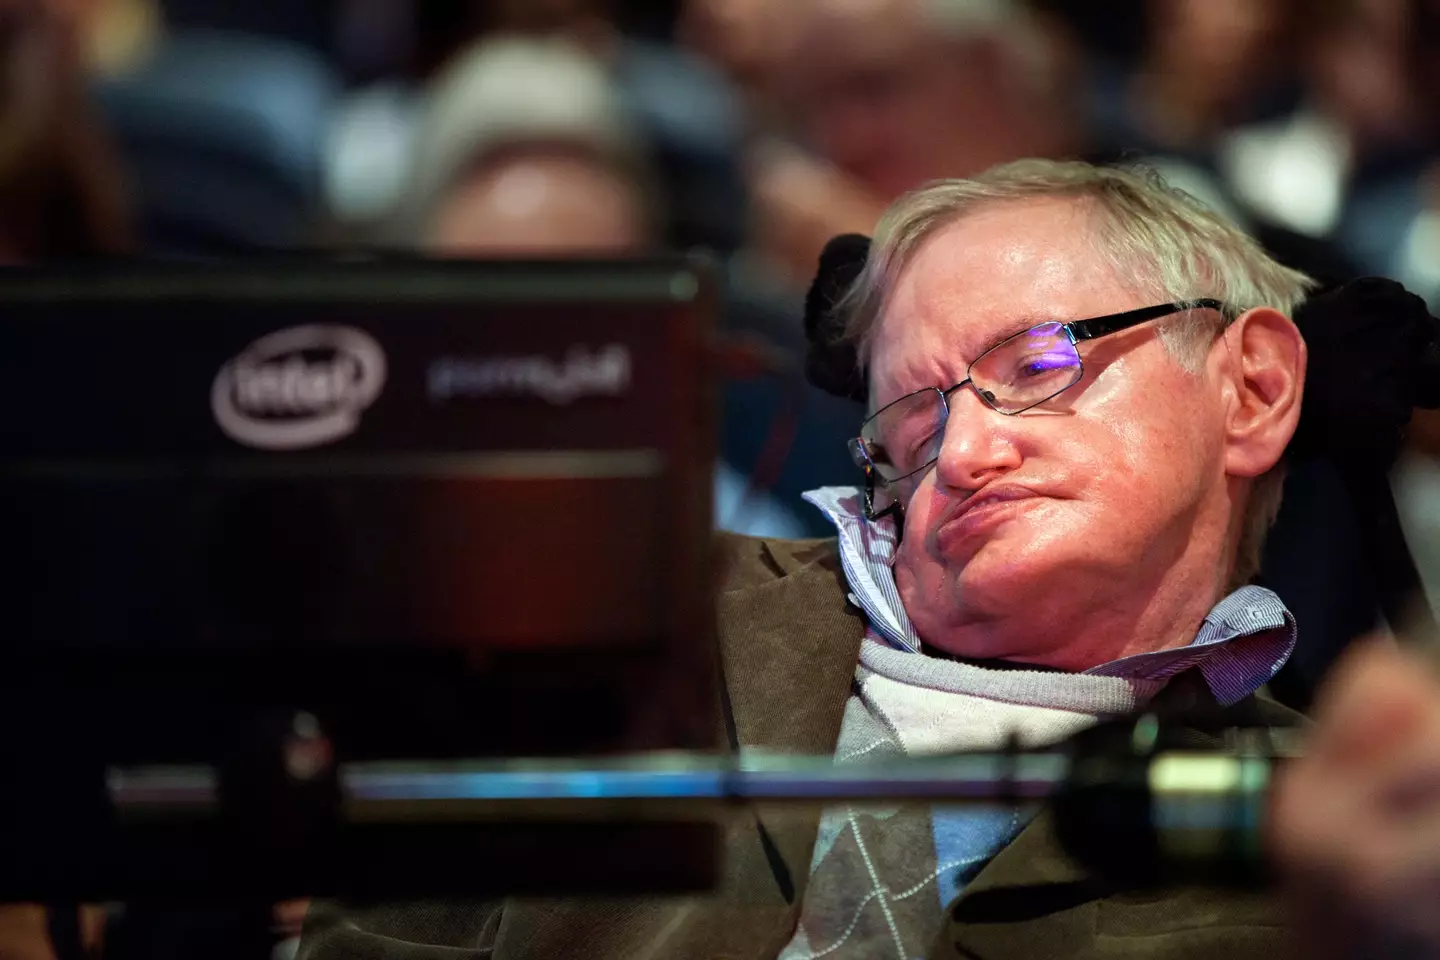 Stephen Hawking passed away in 2018 aged 76.